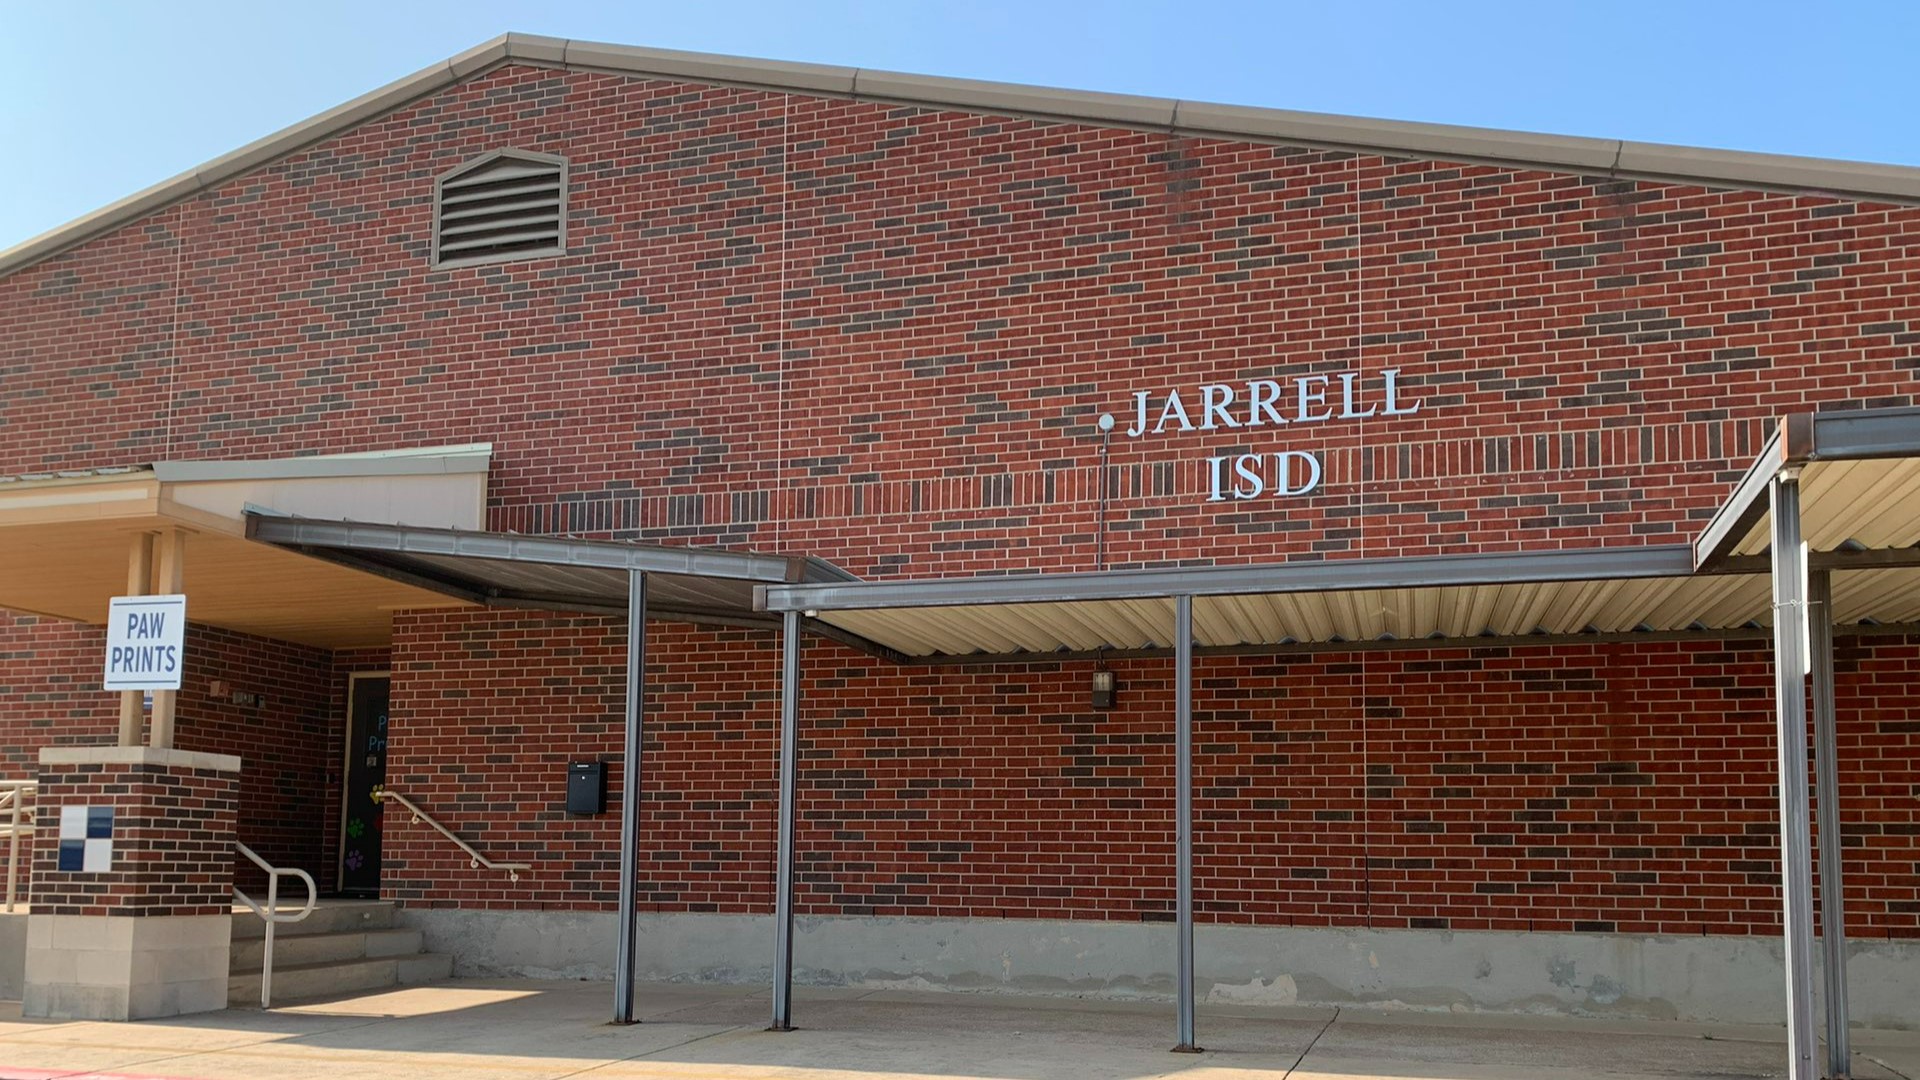 This week, Jarrell ISD will have additional police officers and state troopers on campuses after what they call reckless threats on social media.